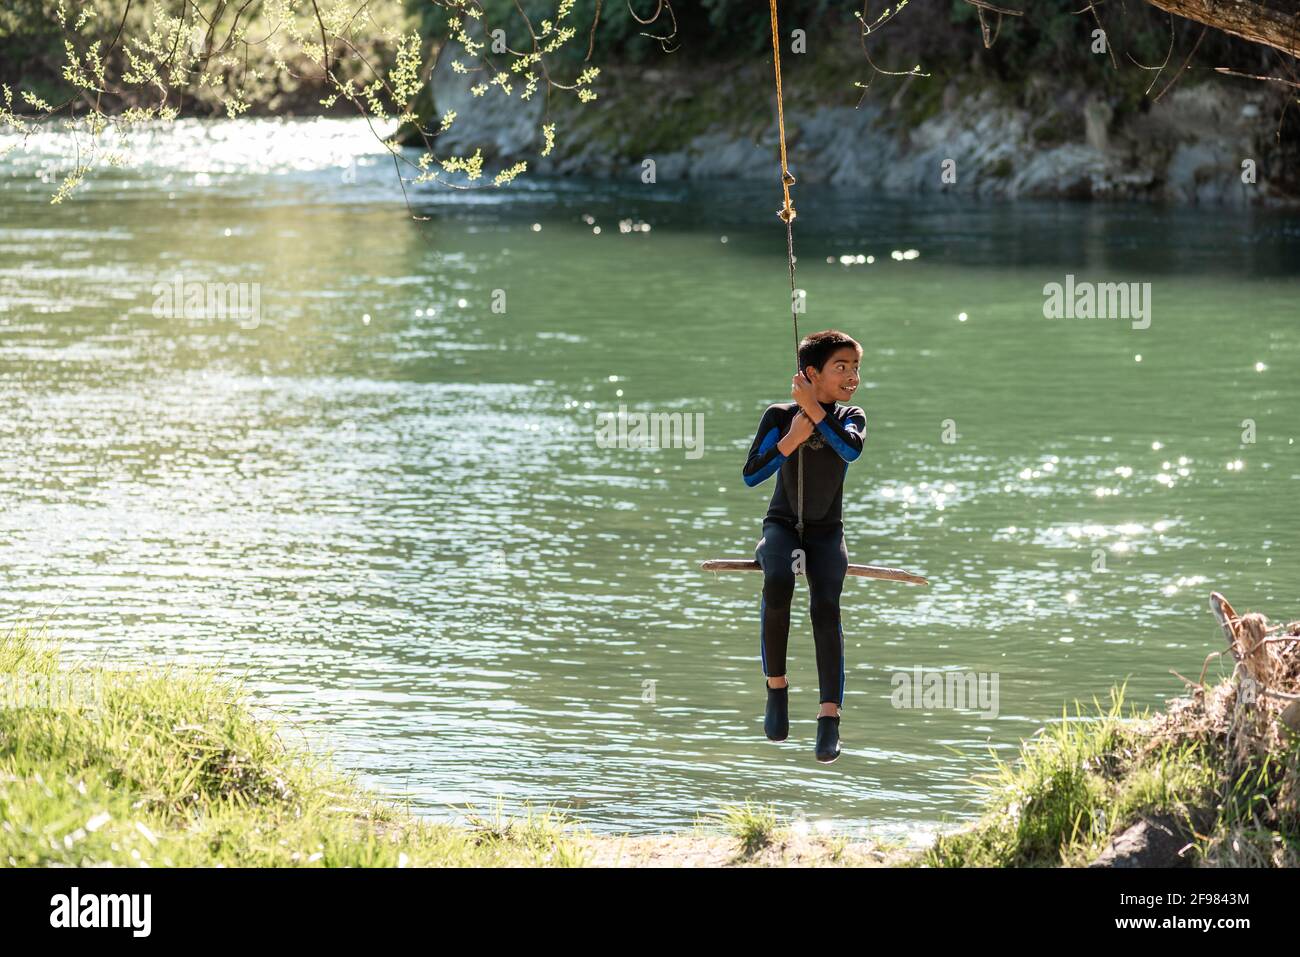 New Zealand Photos  Young boy smiling and sharing a rope swing